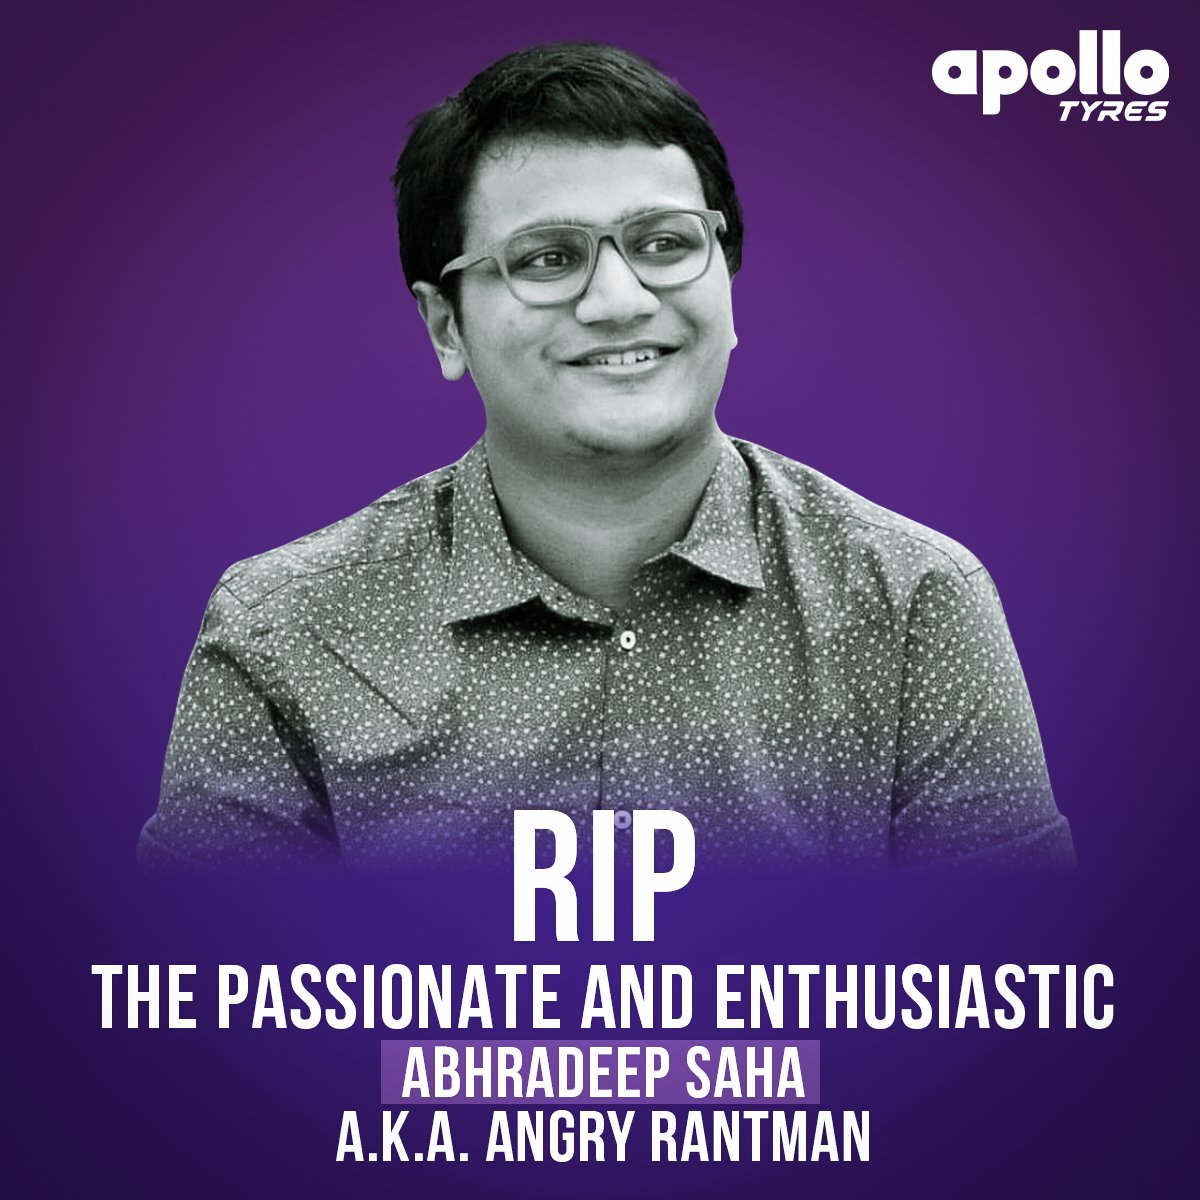 A passionate sports enthusiast and visionary content creator who went the distance to entertain us! The sports community will deeply miss you but your content will forever be cherished, Angry Rantman ❤️ @apollotyres extends our heartfelt condolences to his family and friends.